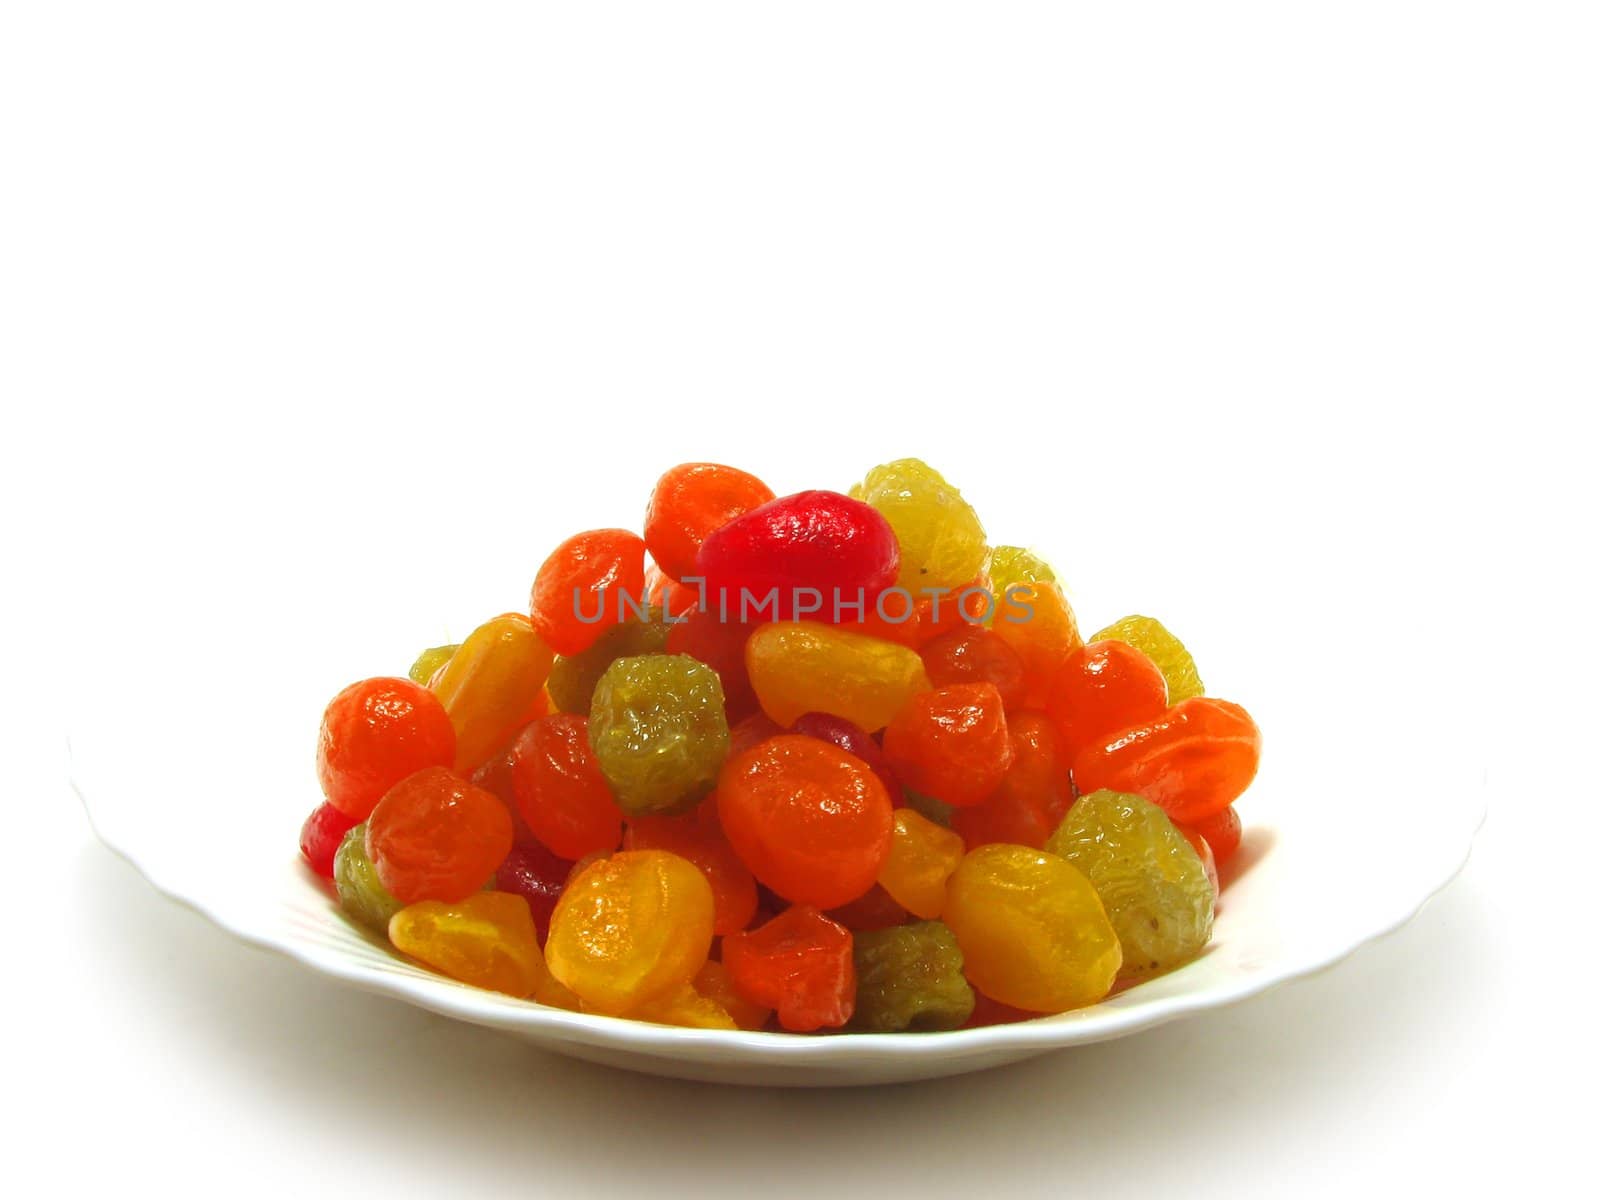 The candied fruits in a white plate